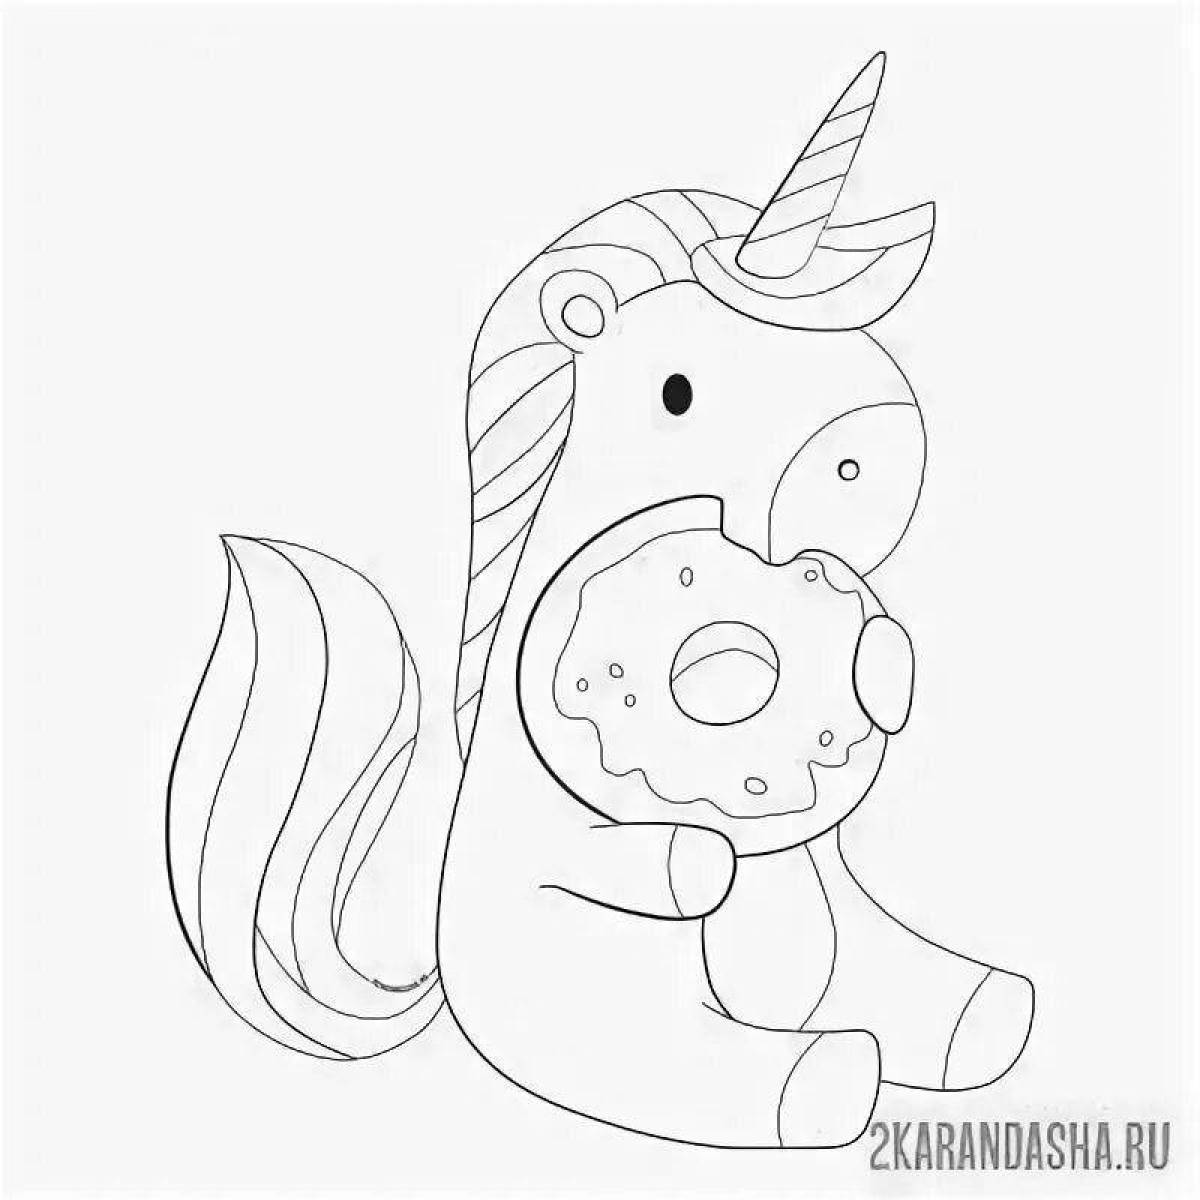 Radiant coloring page unicorn donut